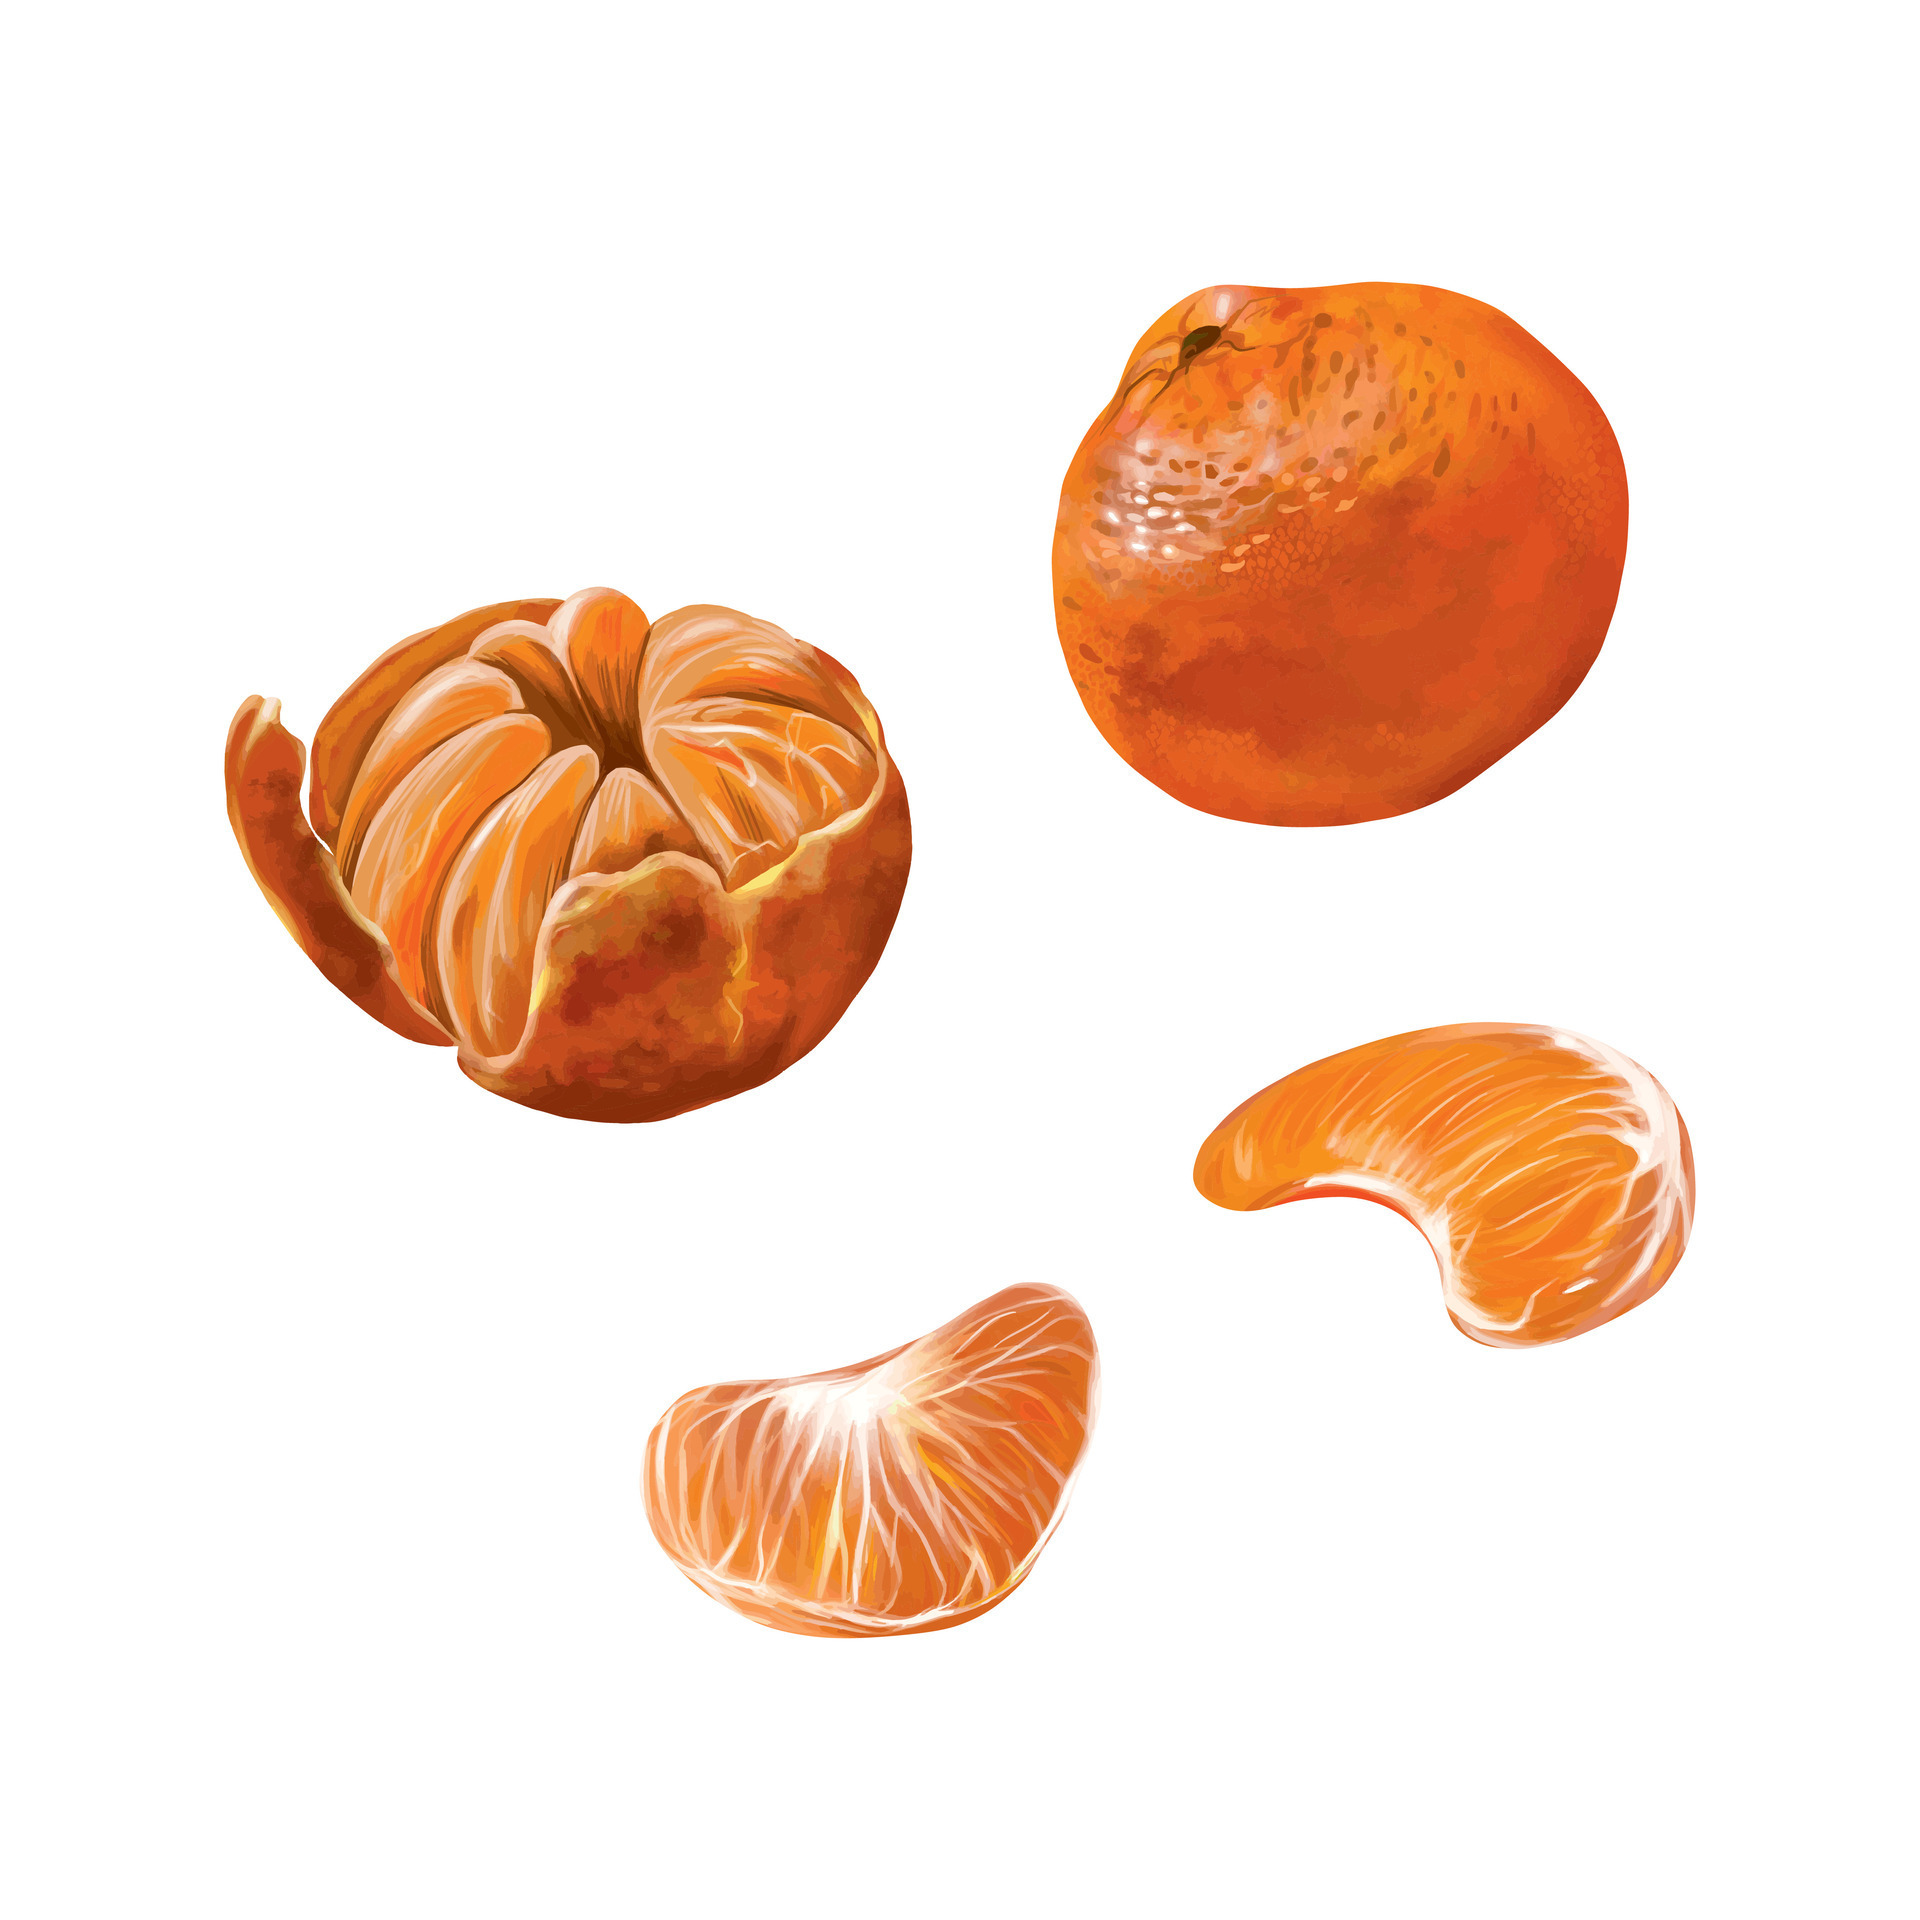 Orange tangerine, whole and slices. Vector illustration for the